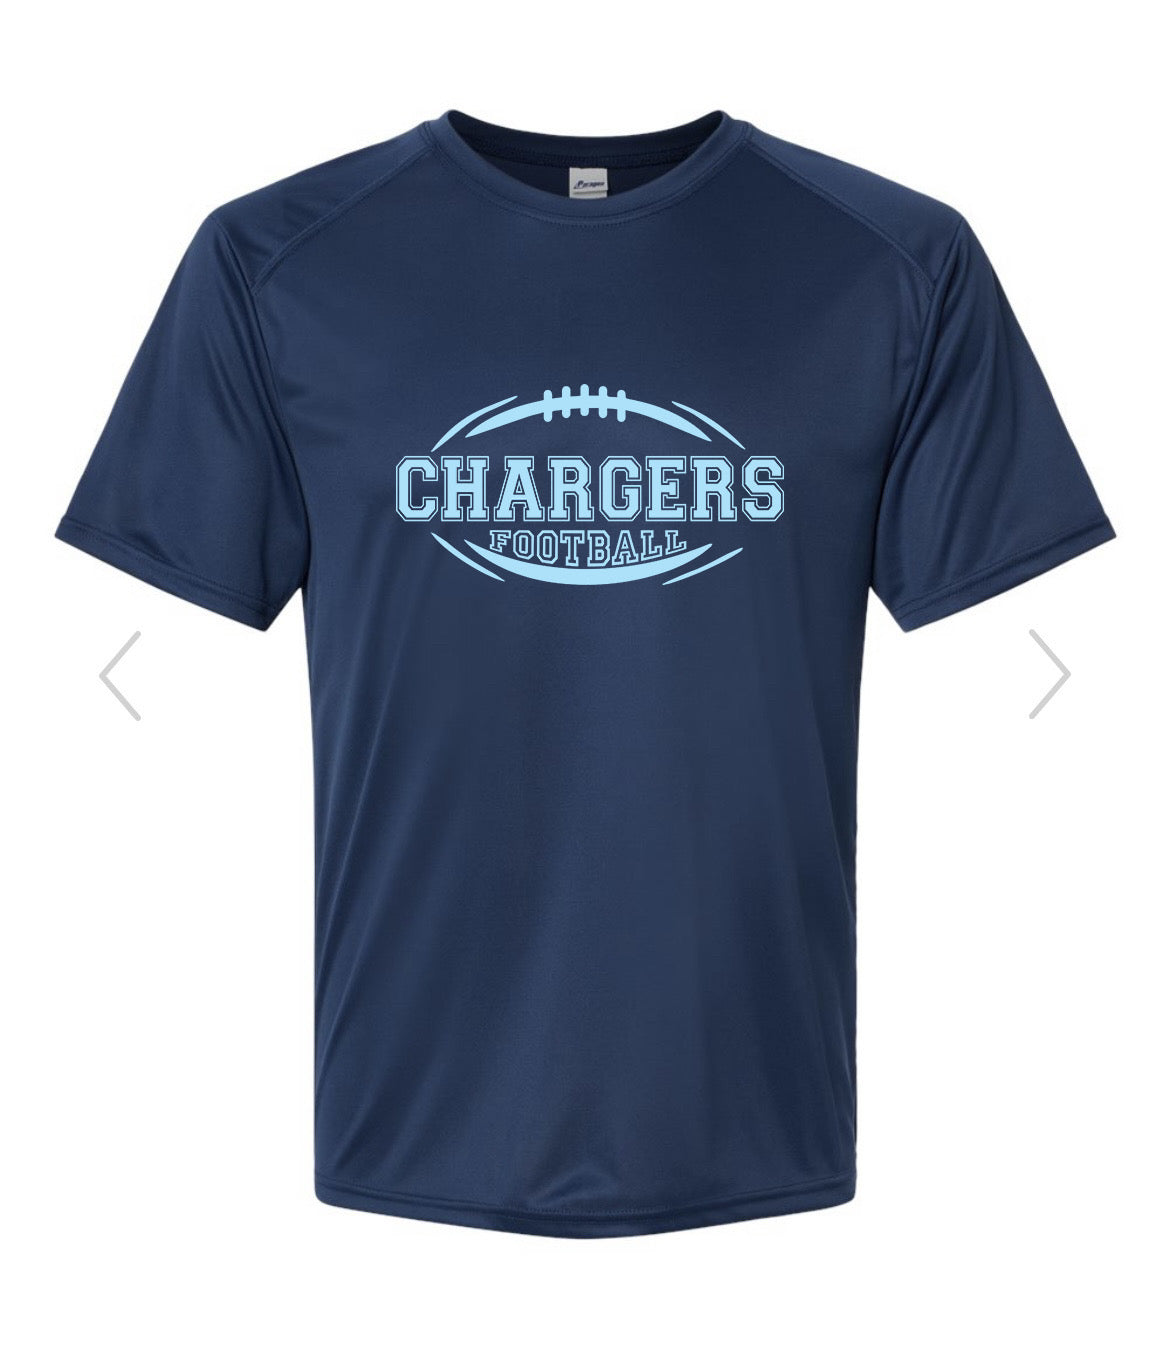 Mens Performance Chargers Football Shirt